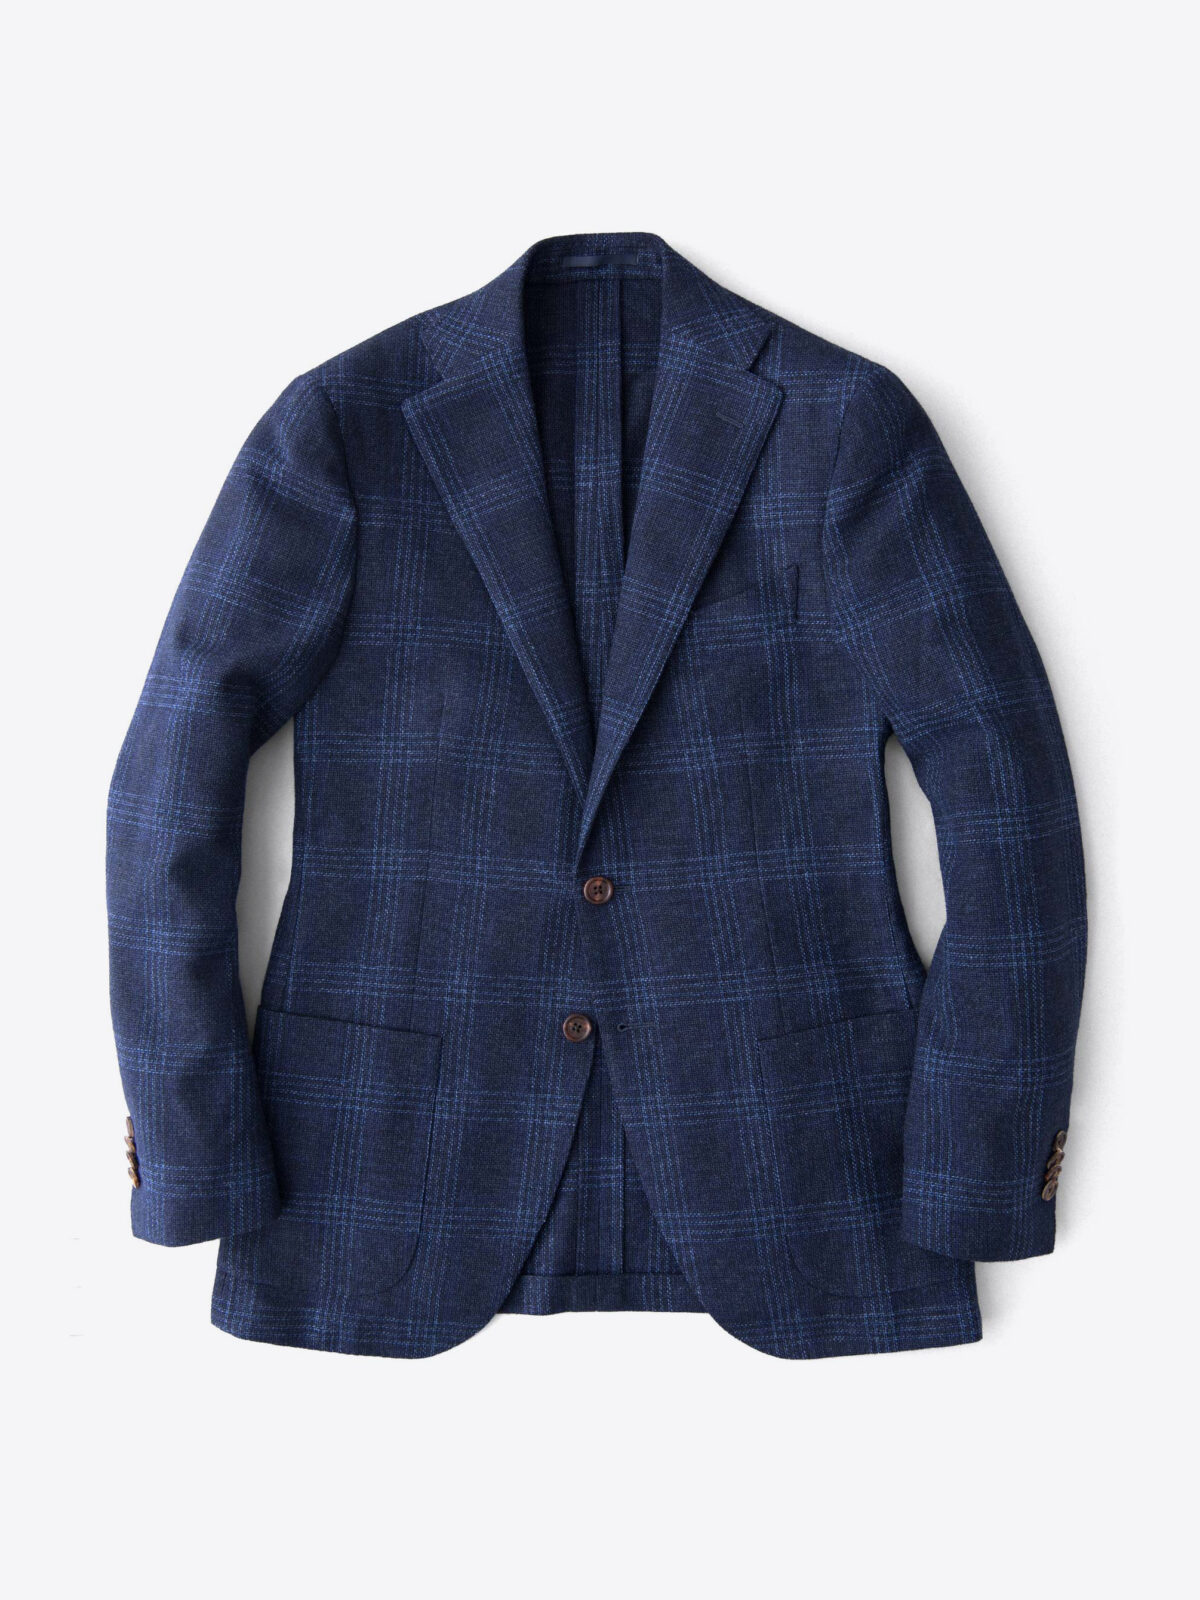 Hudson Navy and Blue Check Textured Wool Jacket